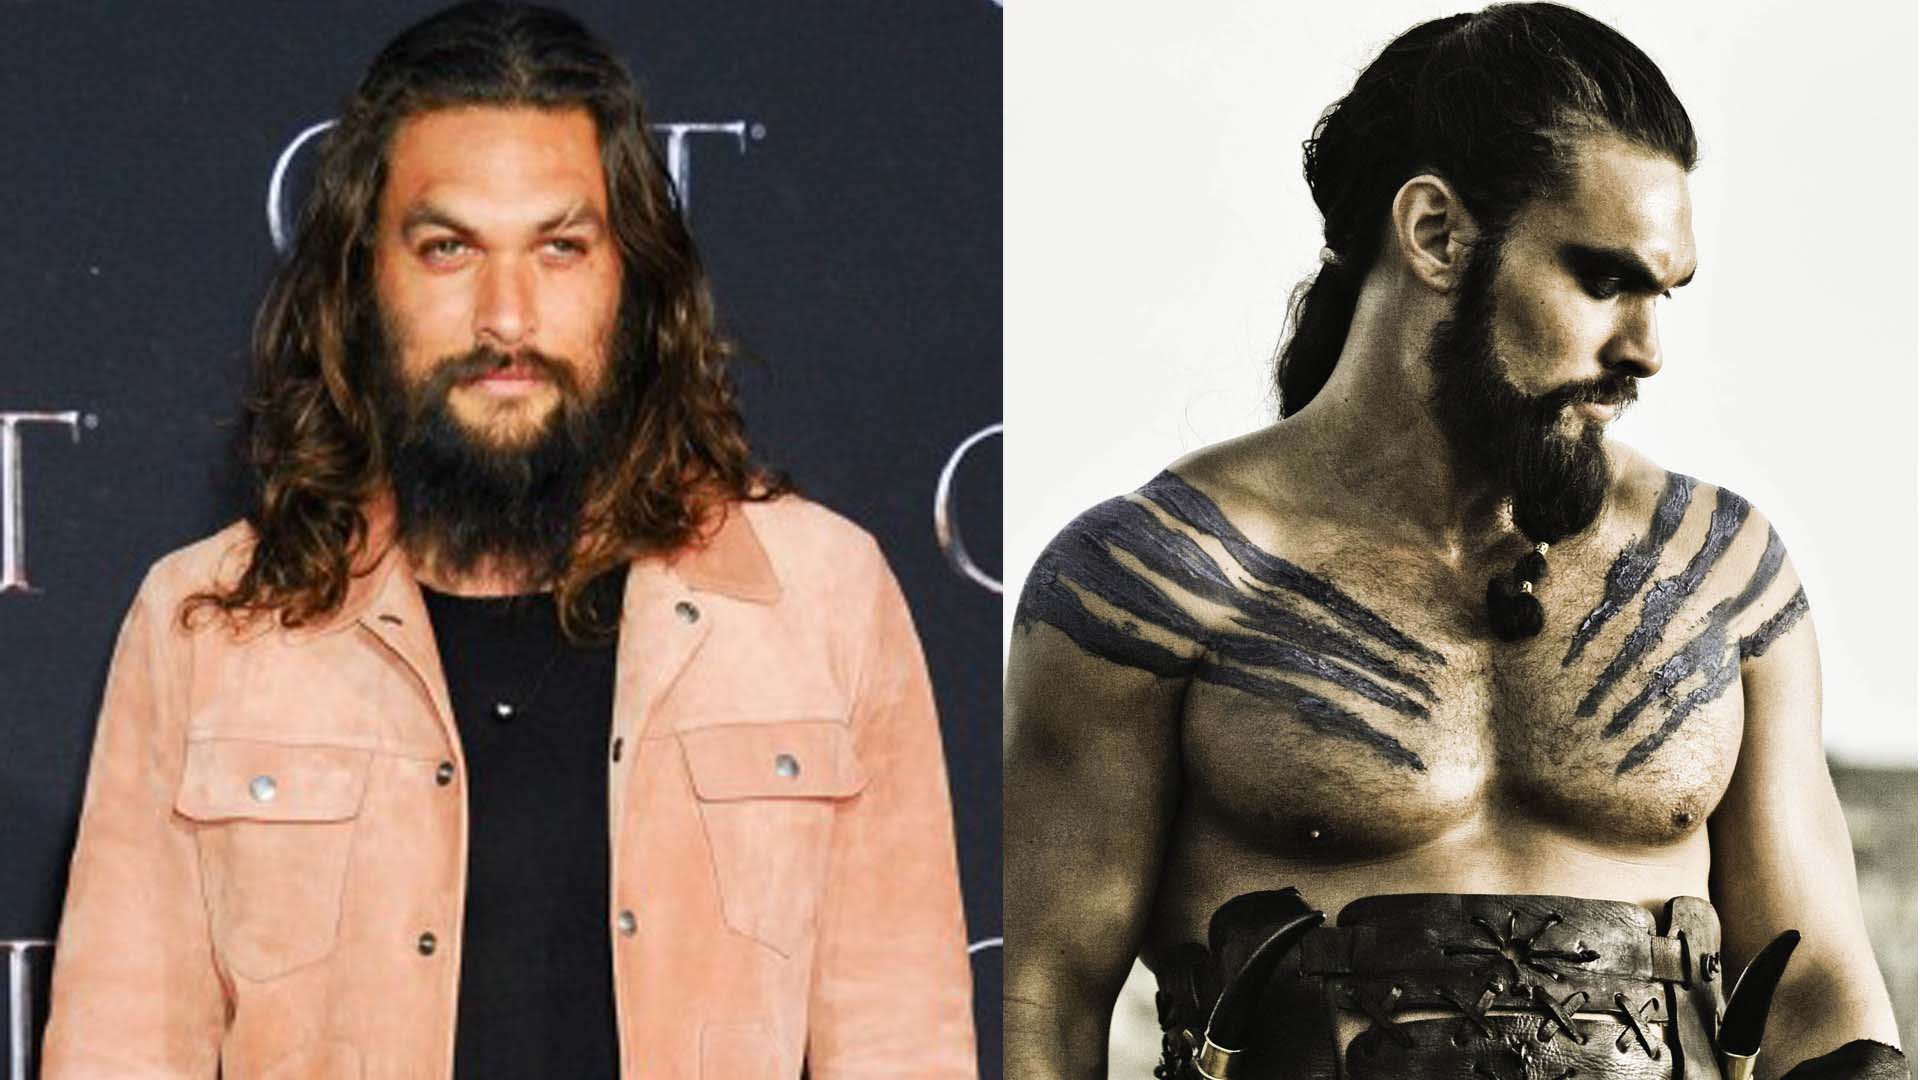 Jason Momoa Isn’t Thrilled Being Asked About A Certain Scene In Game Of Thrones